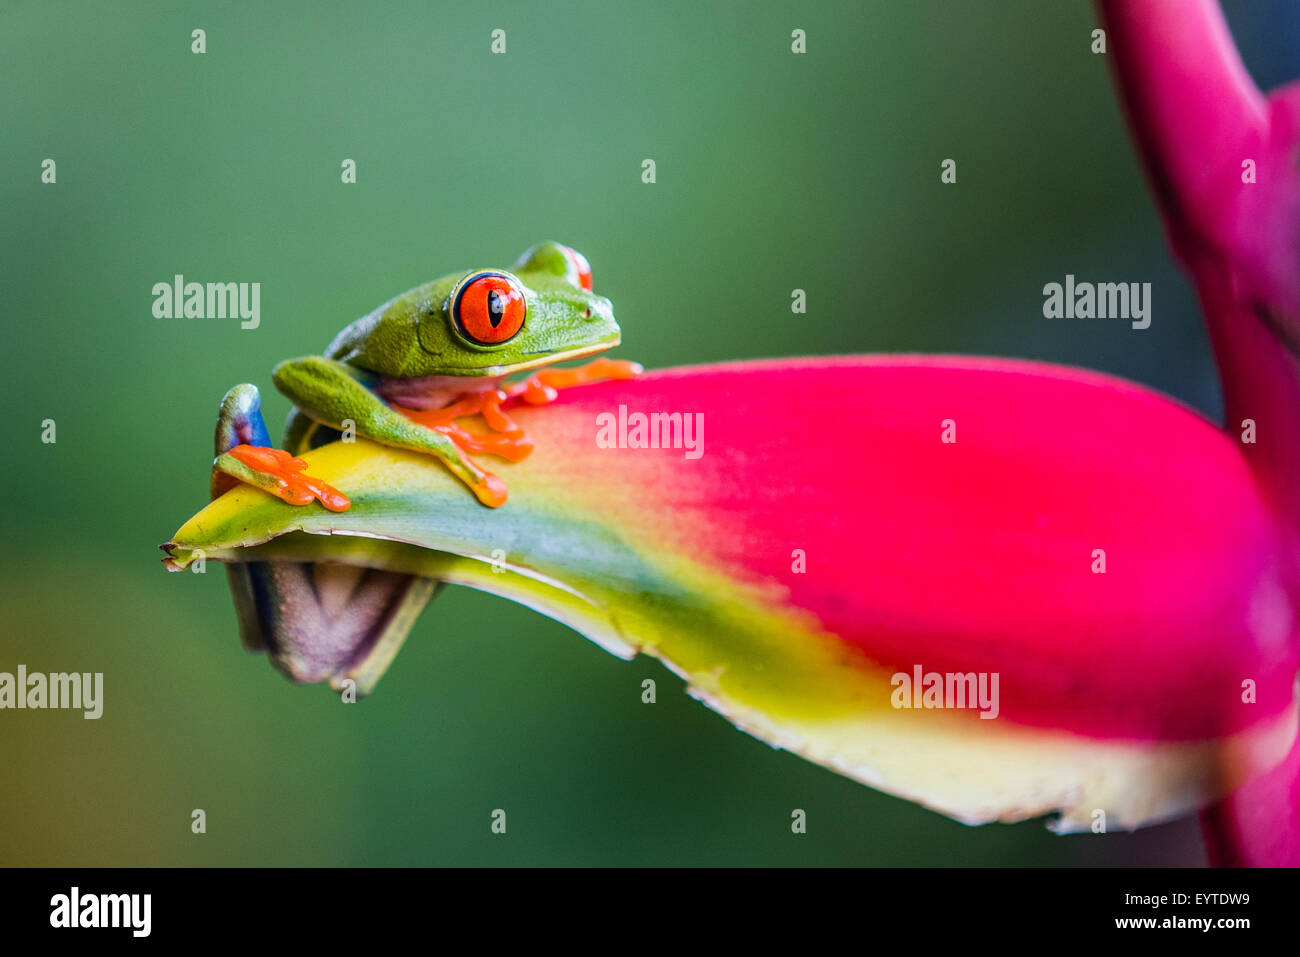 A Red-eyed Tree Frog on a False Bird of Paradise flower Stock Photo